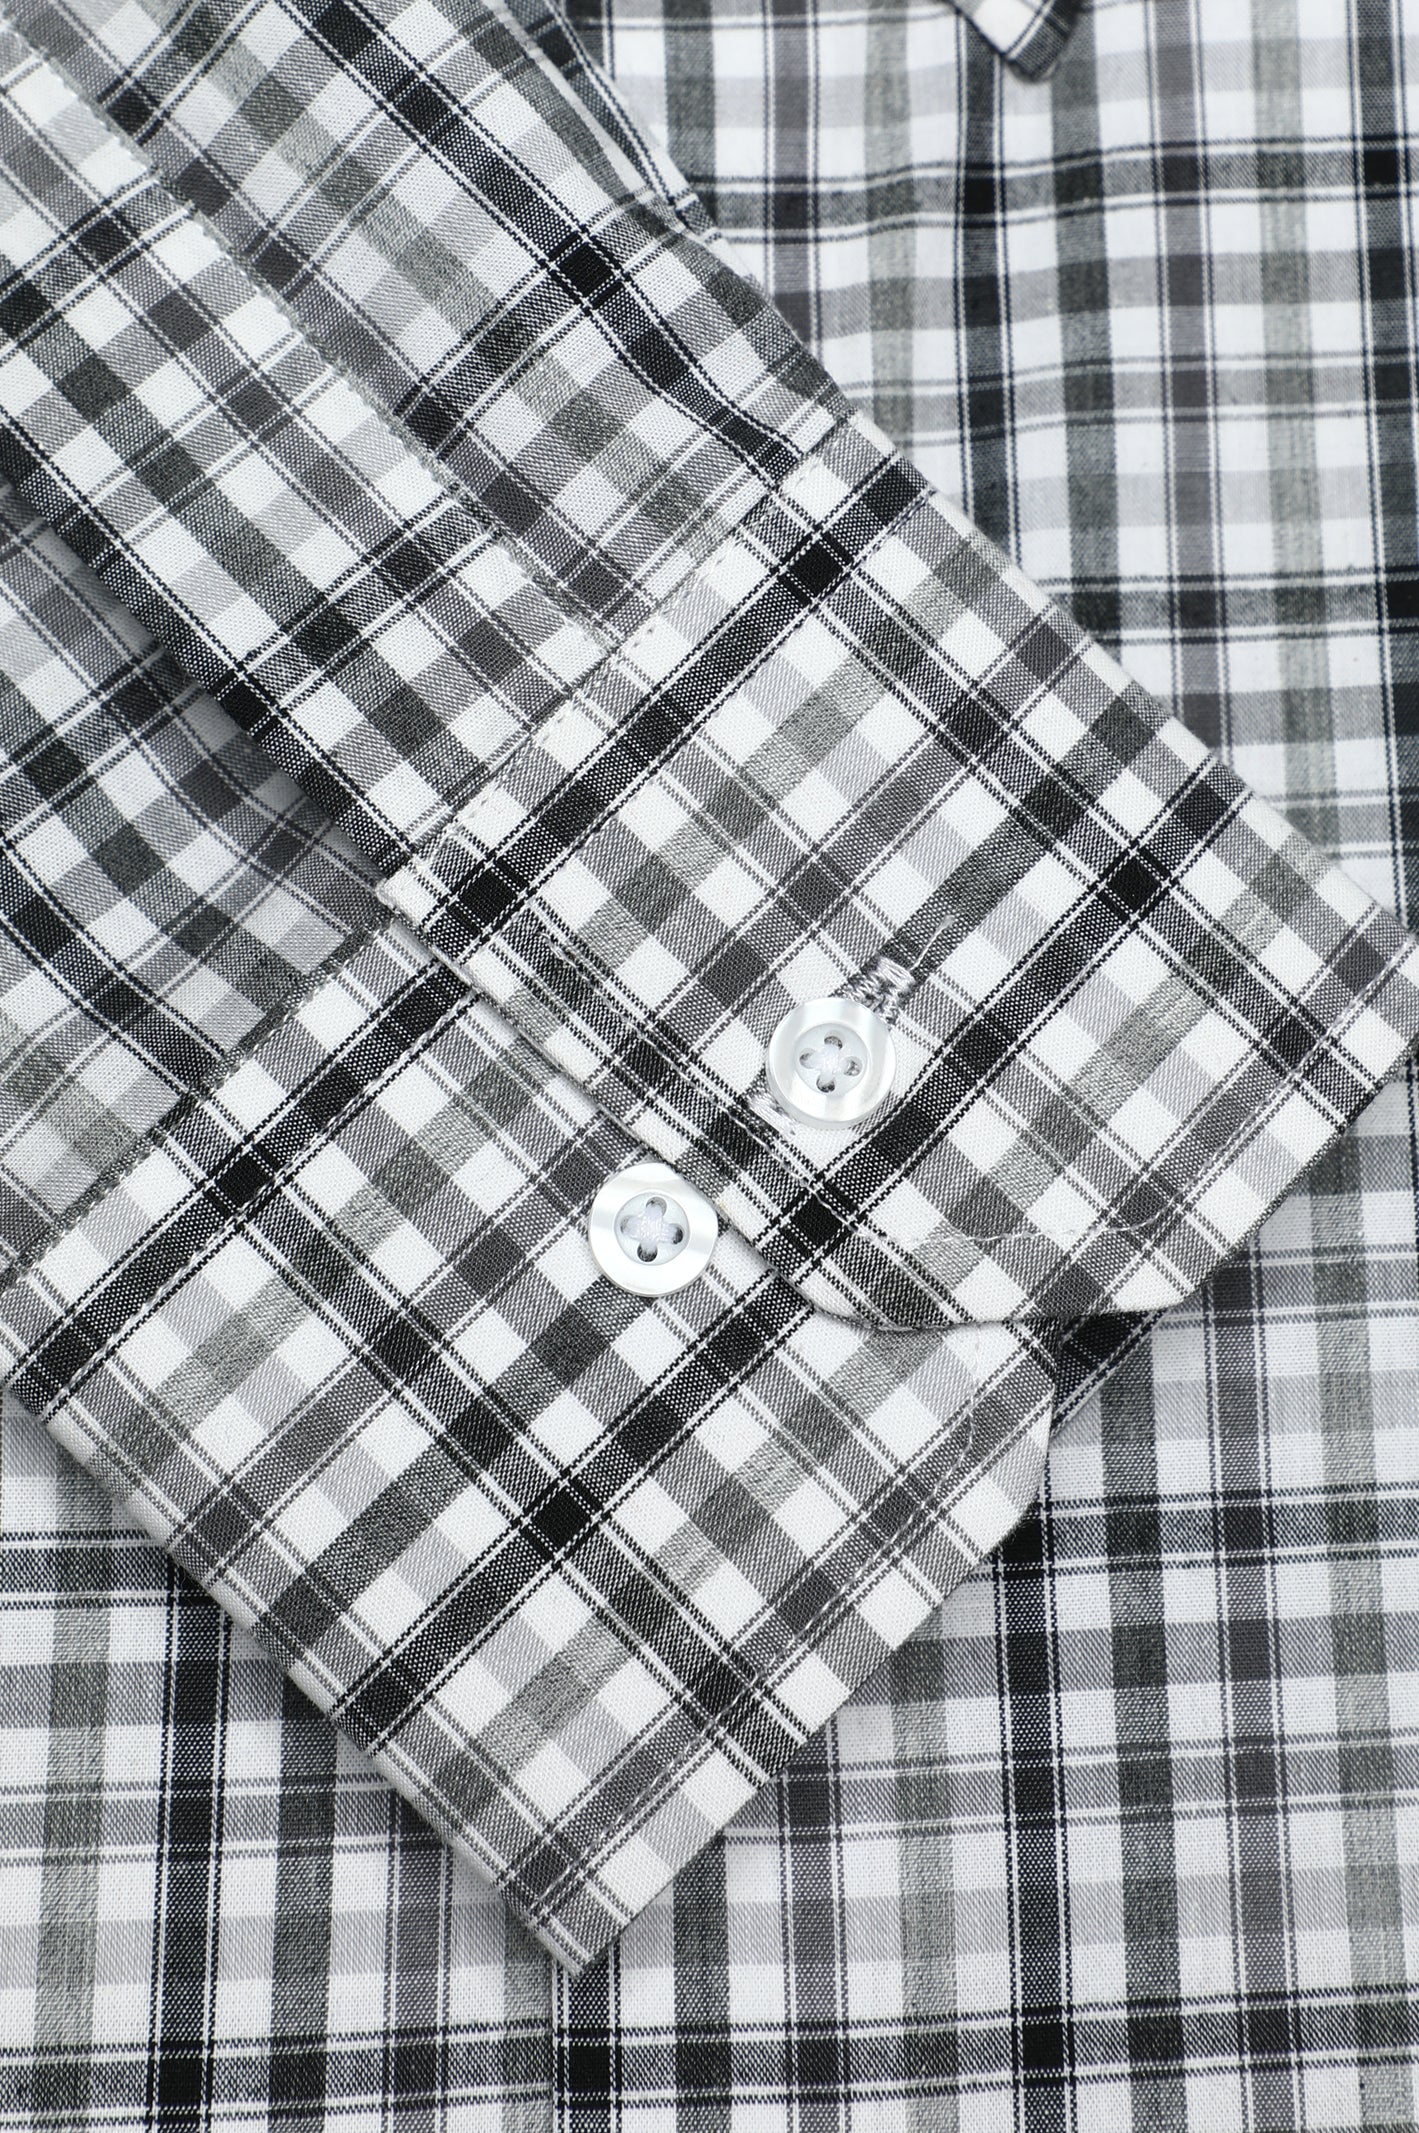 Grey Gingham Check Casual Shirt From Diners